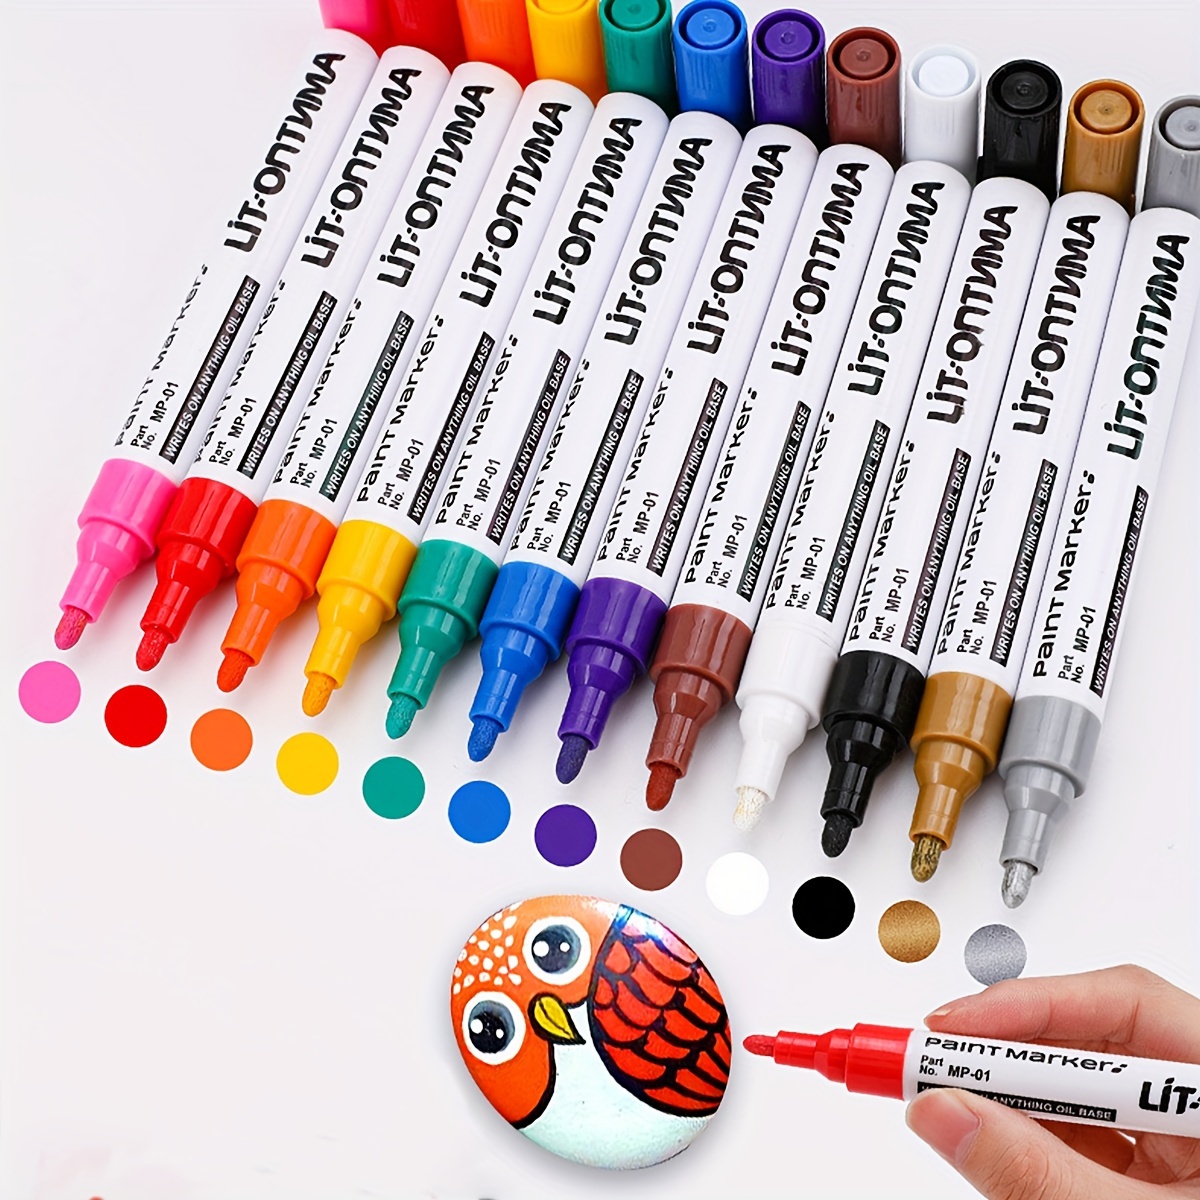 colpart Acrylic Paint Pens Paint Markers - 12 Pack Acrylic Paint Markers  For Rock Painting Wood Canvas Glass Ceramic Plastic Metal and Stone,For DIY